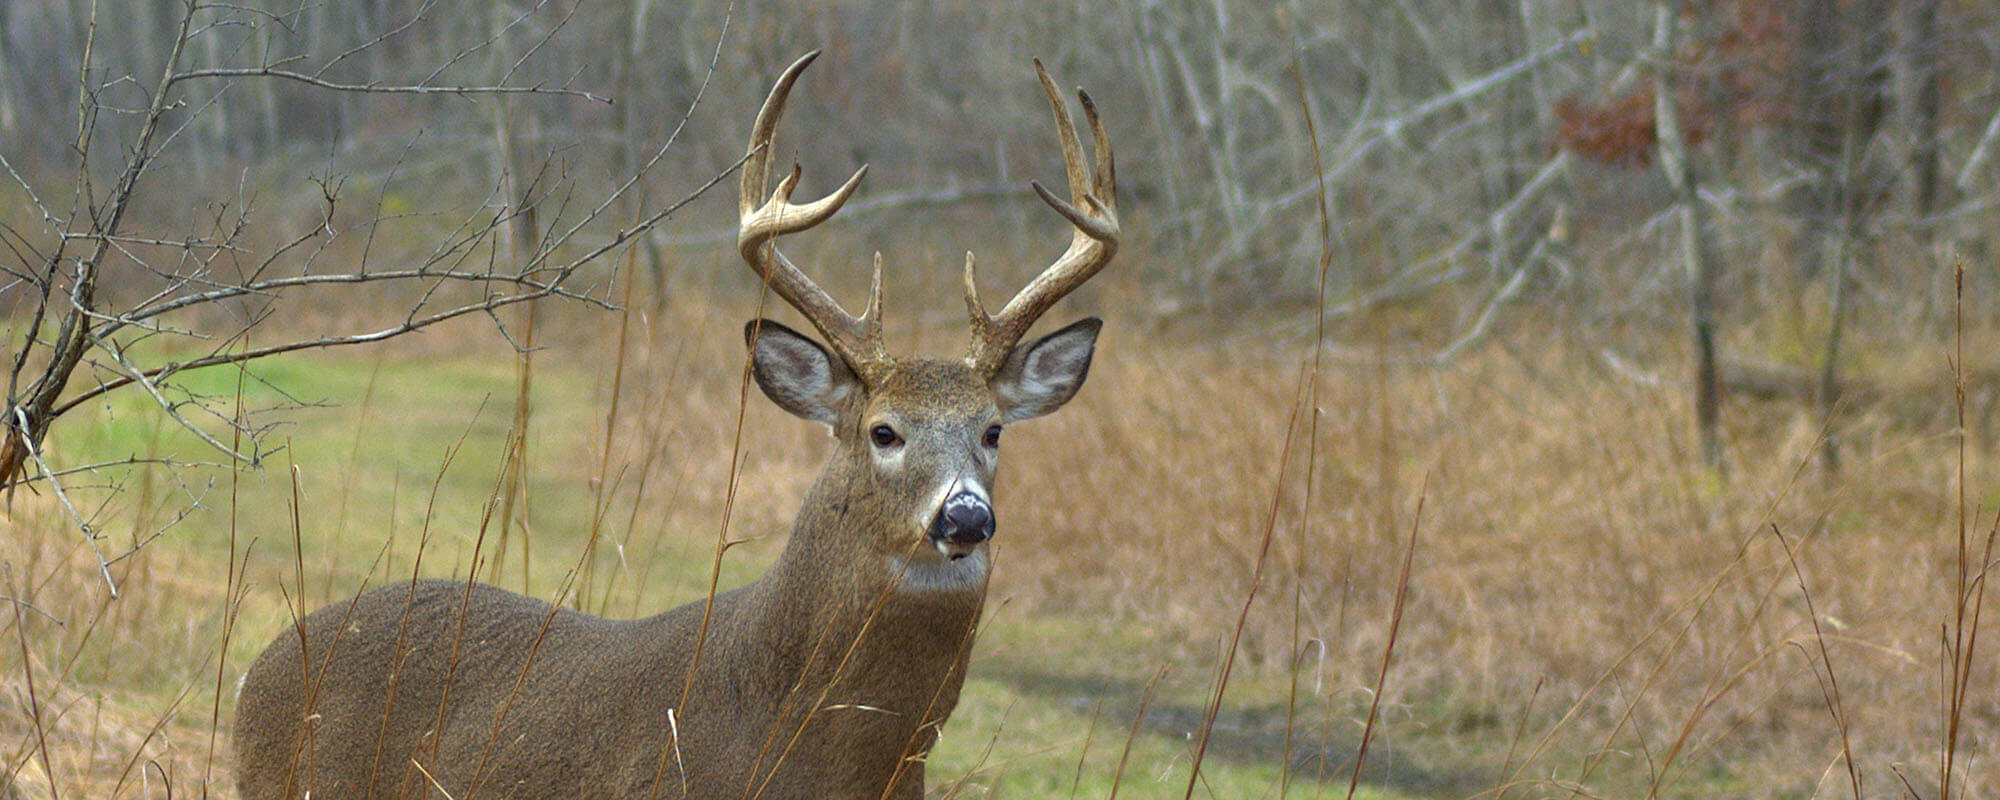 Common white-tailed deer misconceptions affect views